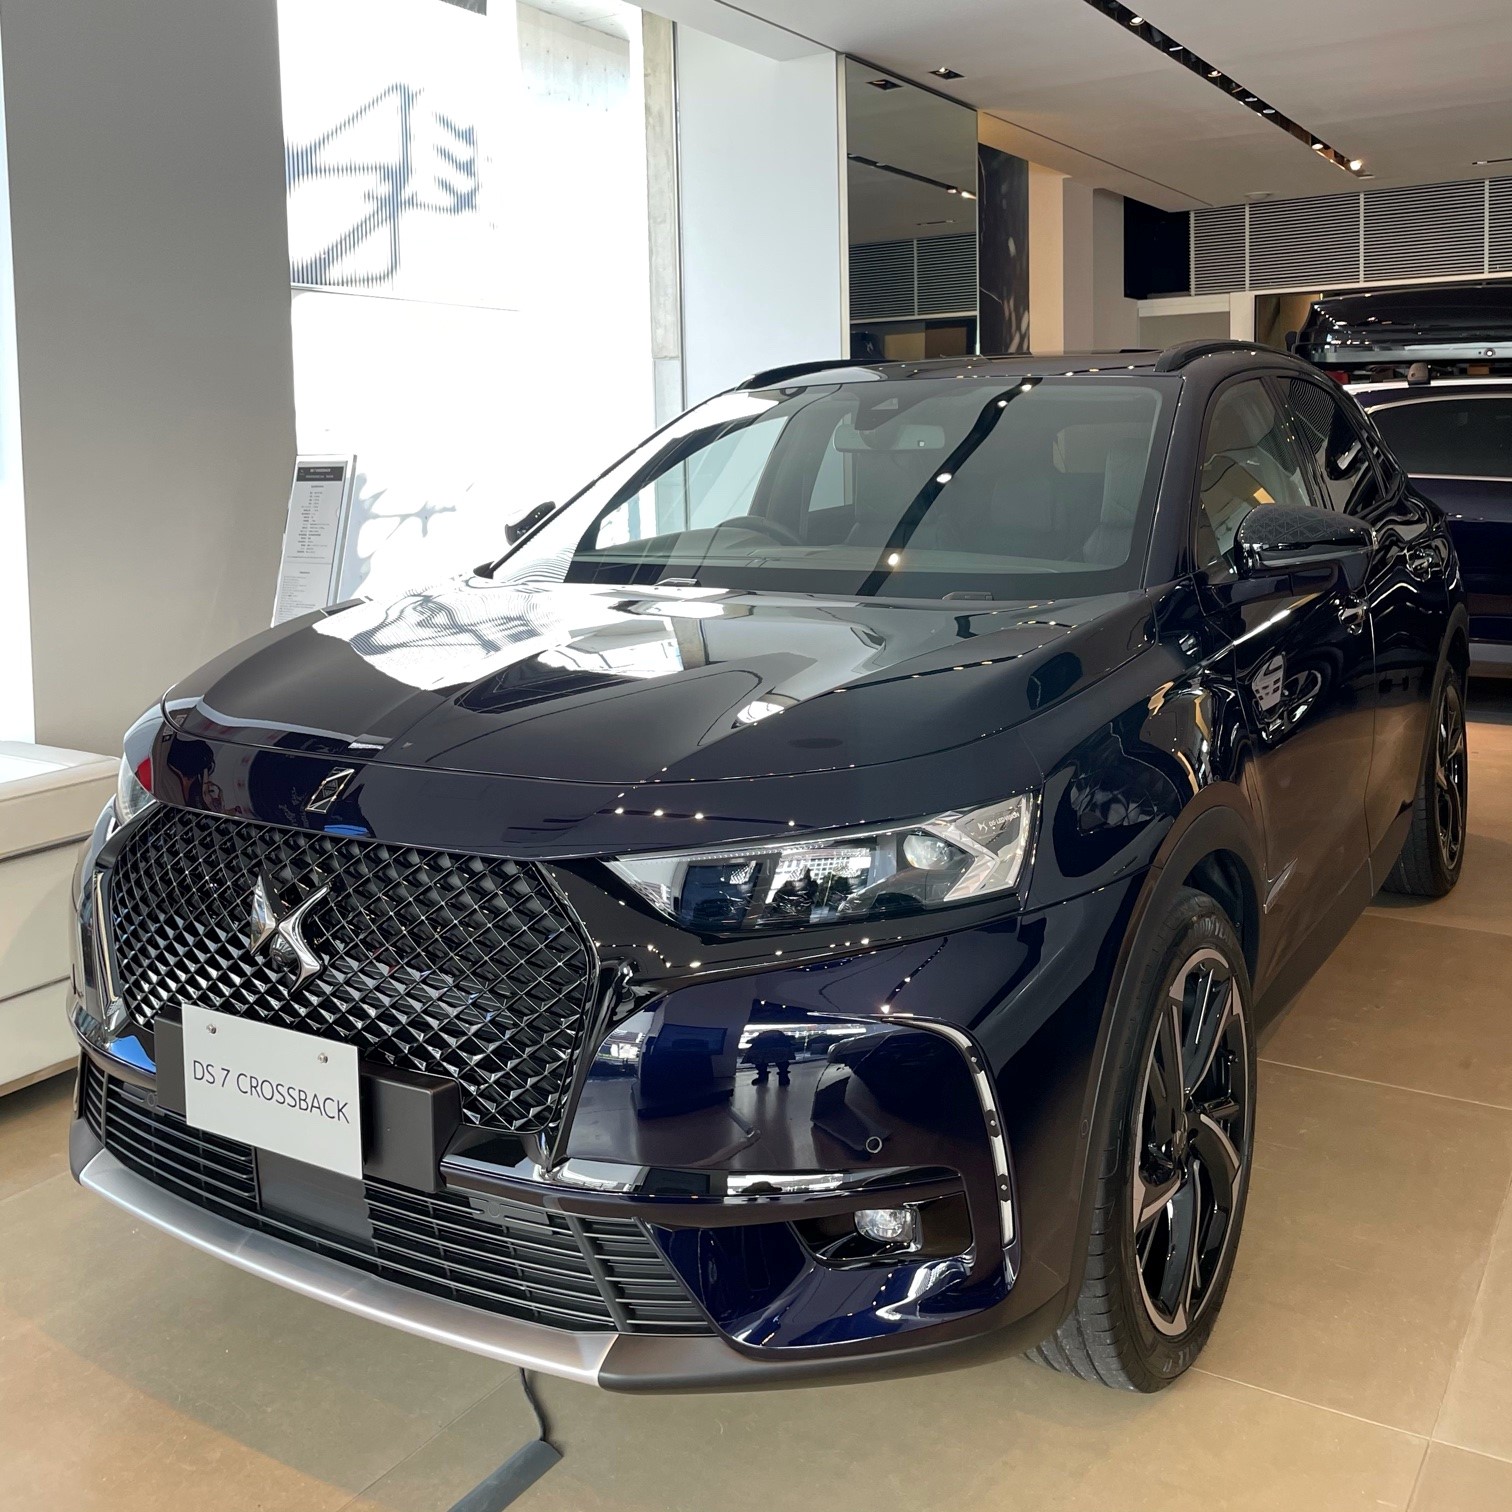 DS 7 CROSSBACK LOUVRE展示中！